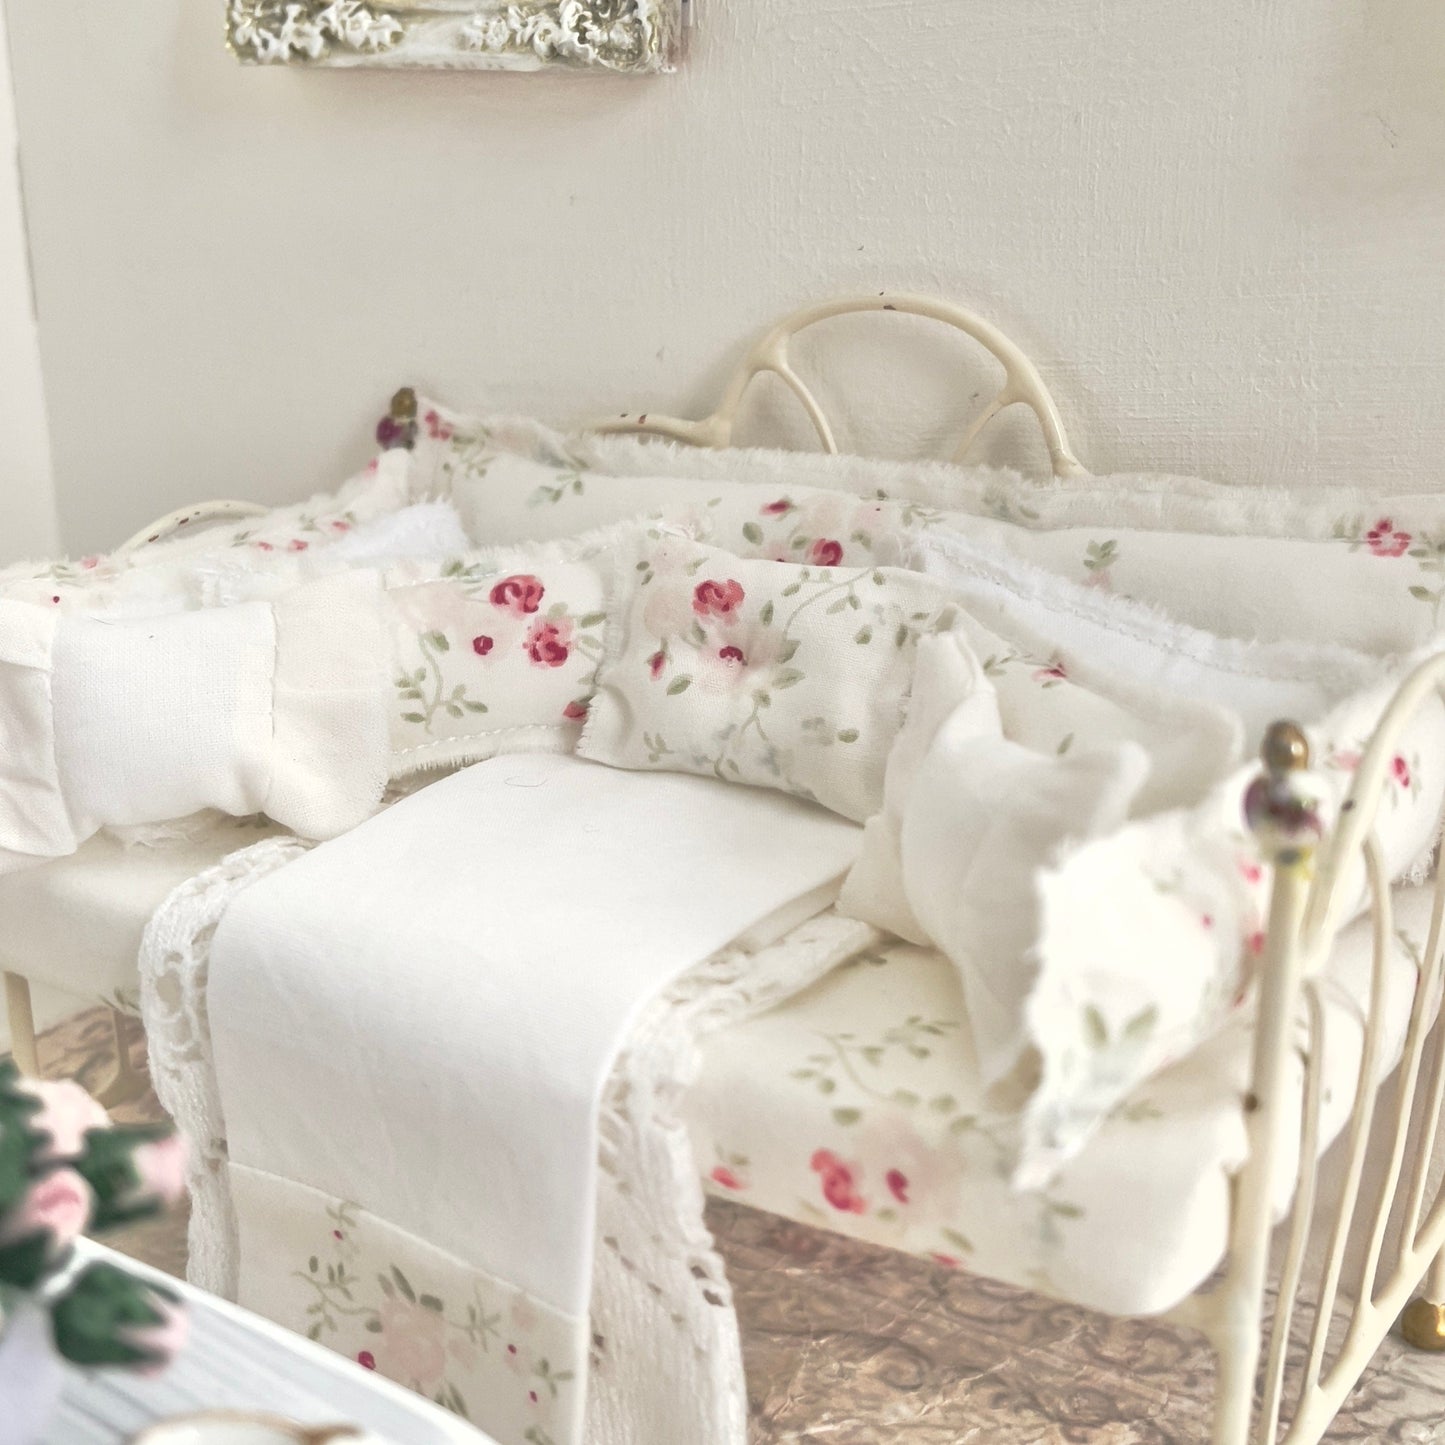 Chantallena Doll House Bedding Day Bed | Shabby Pink Roses with White Cotton Lace Throw 1:12 Scale Dollhouse Set| Floral Clusters